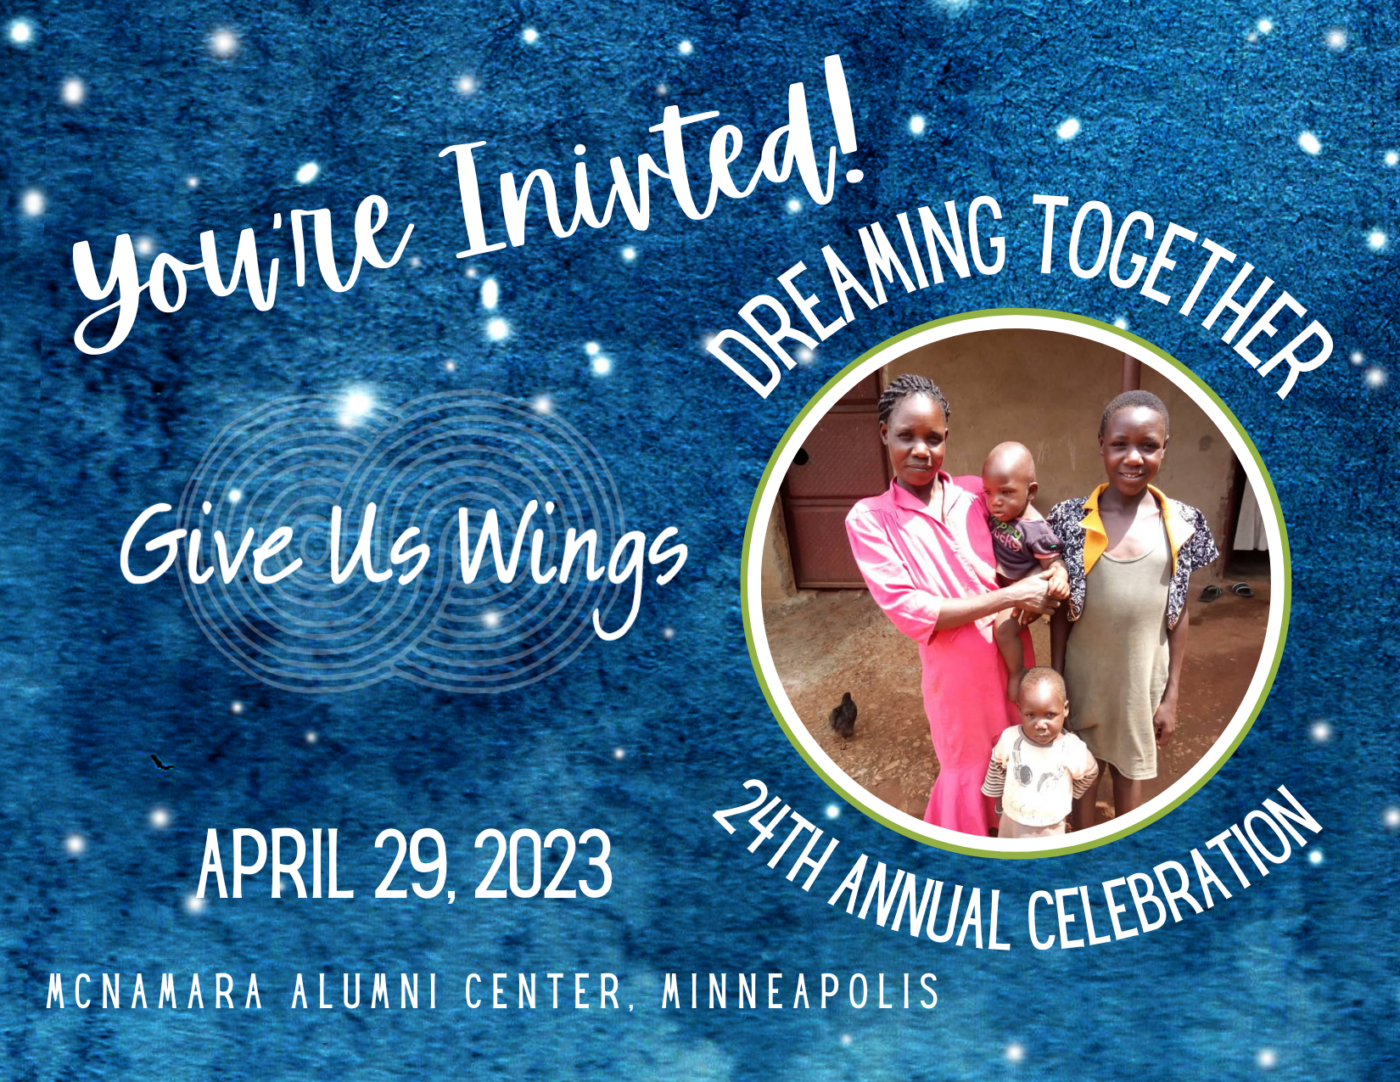 Youre Invited 2023 image- design elements